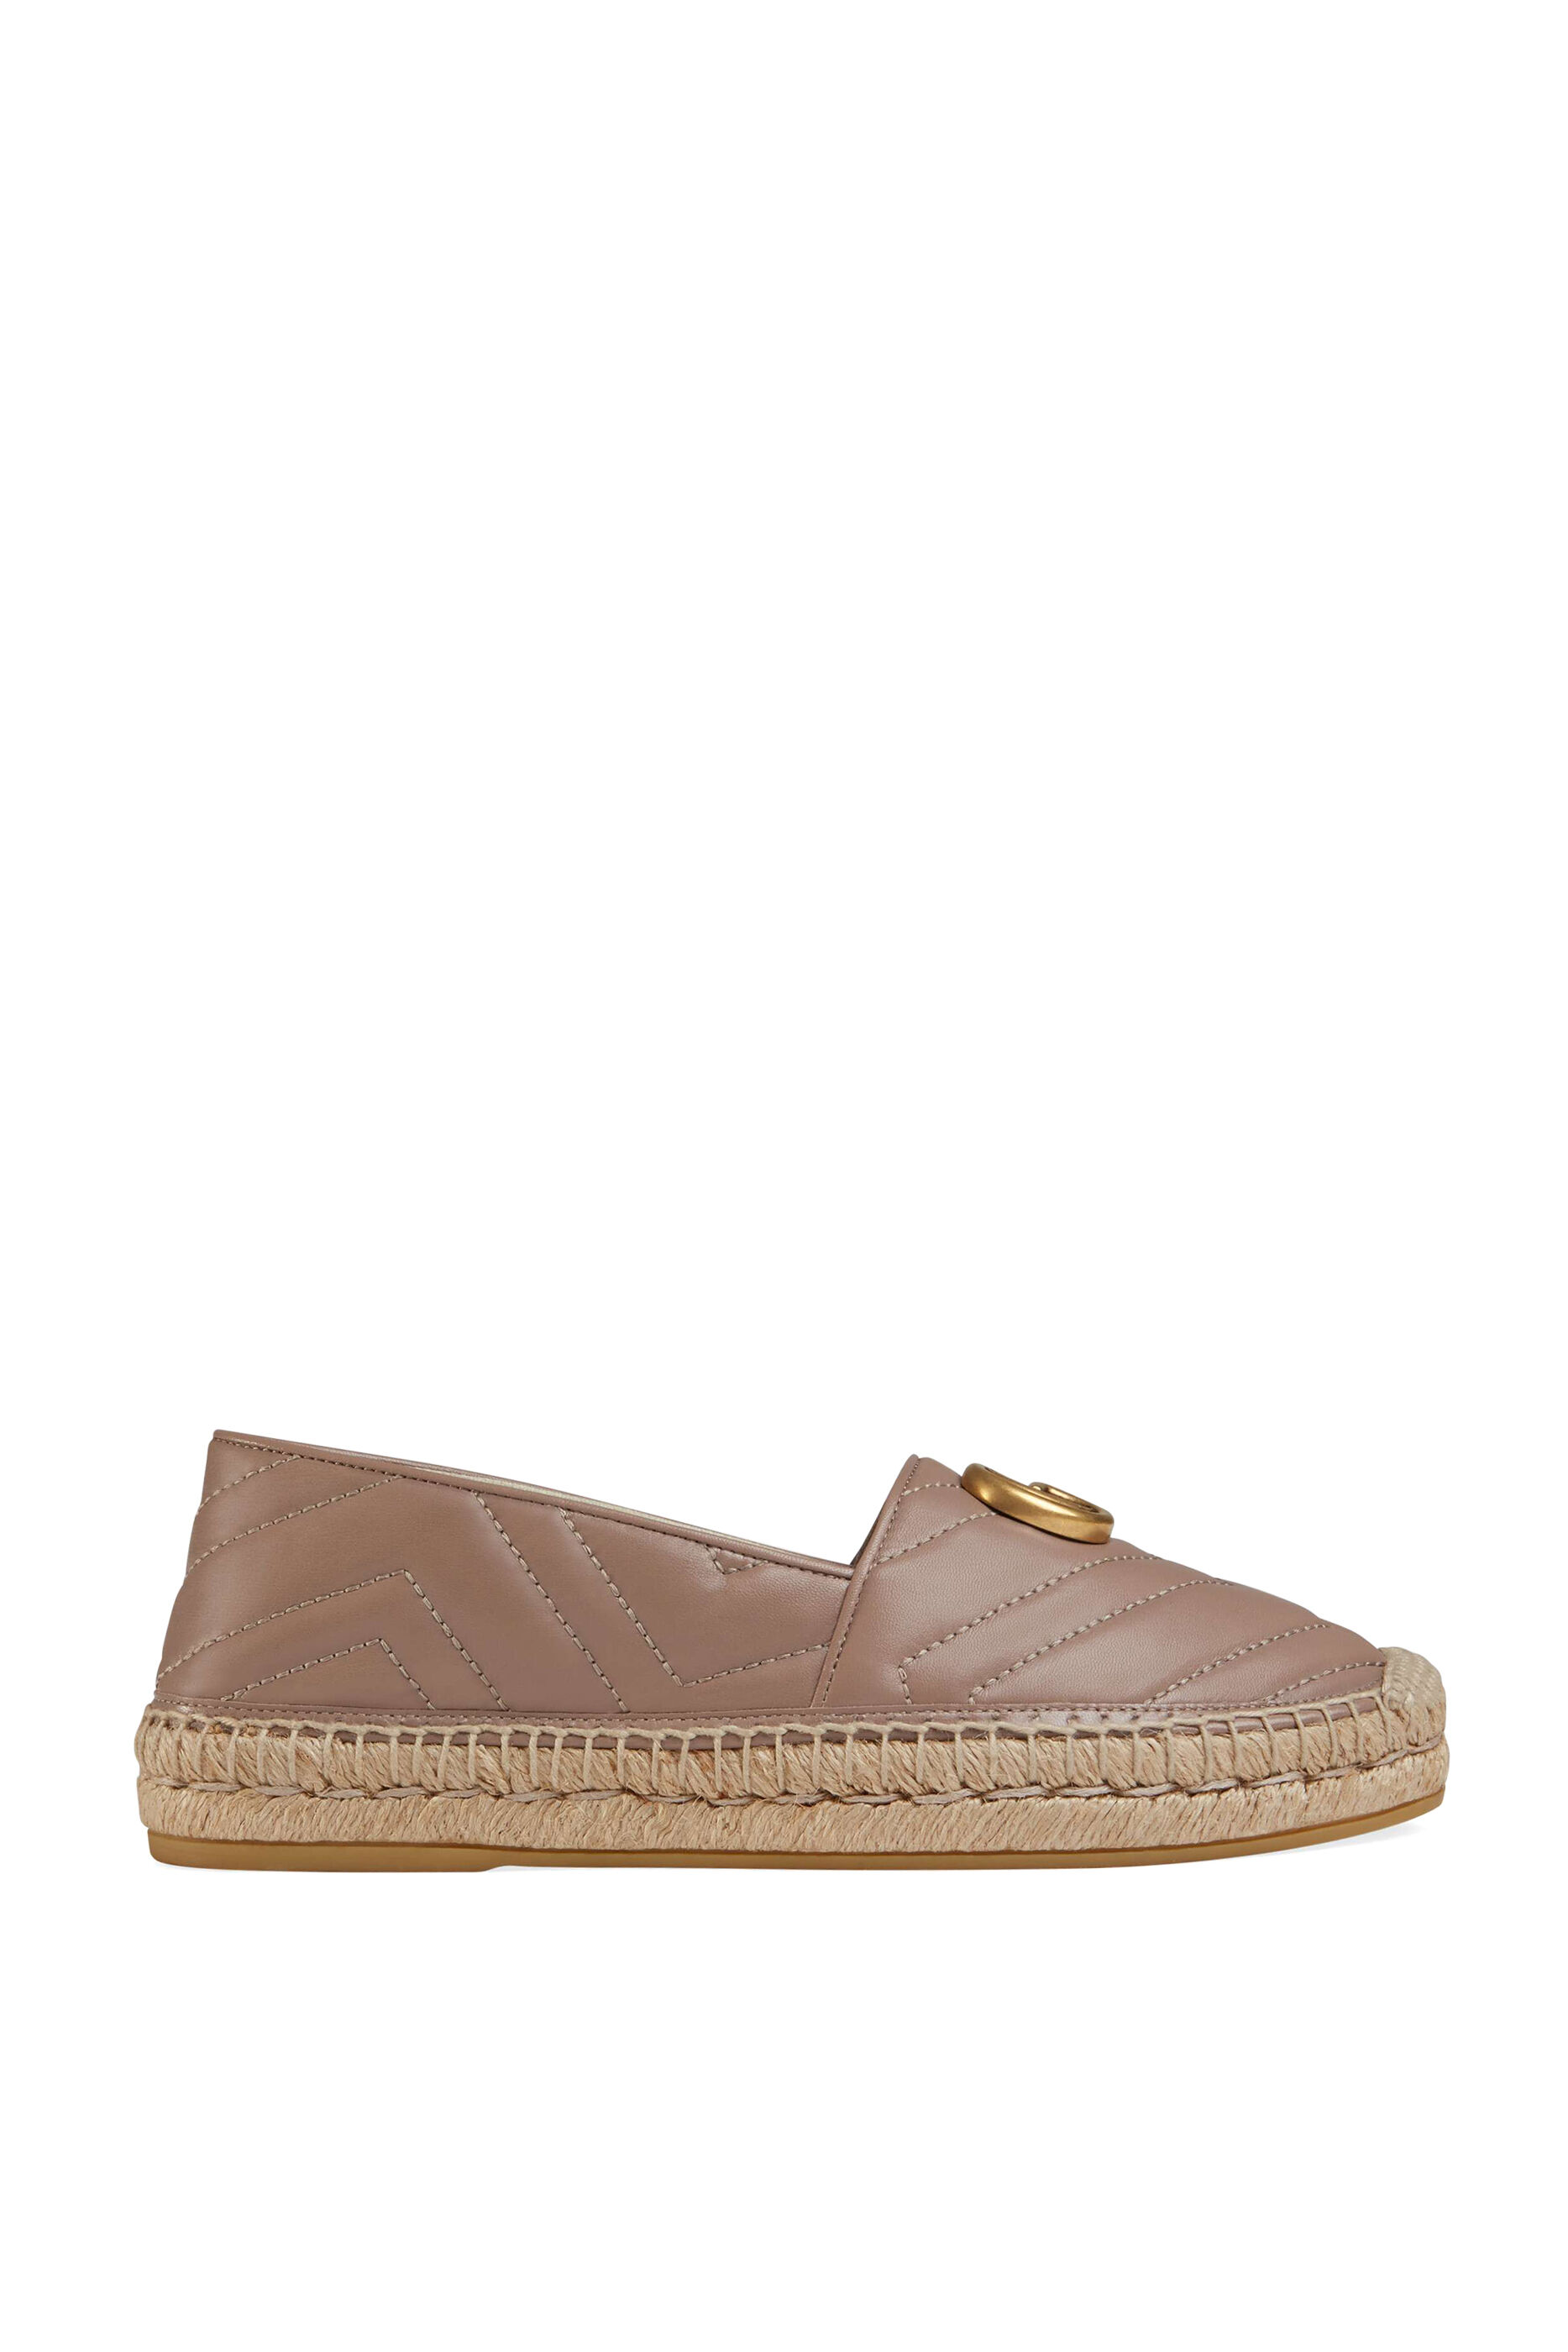 Buy Gucci Leather Espadrilles with 